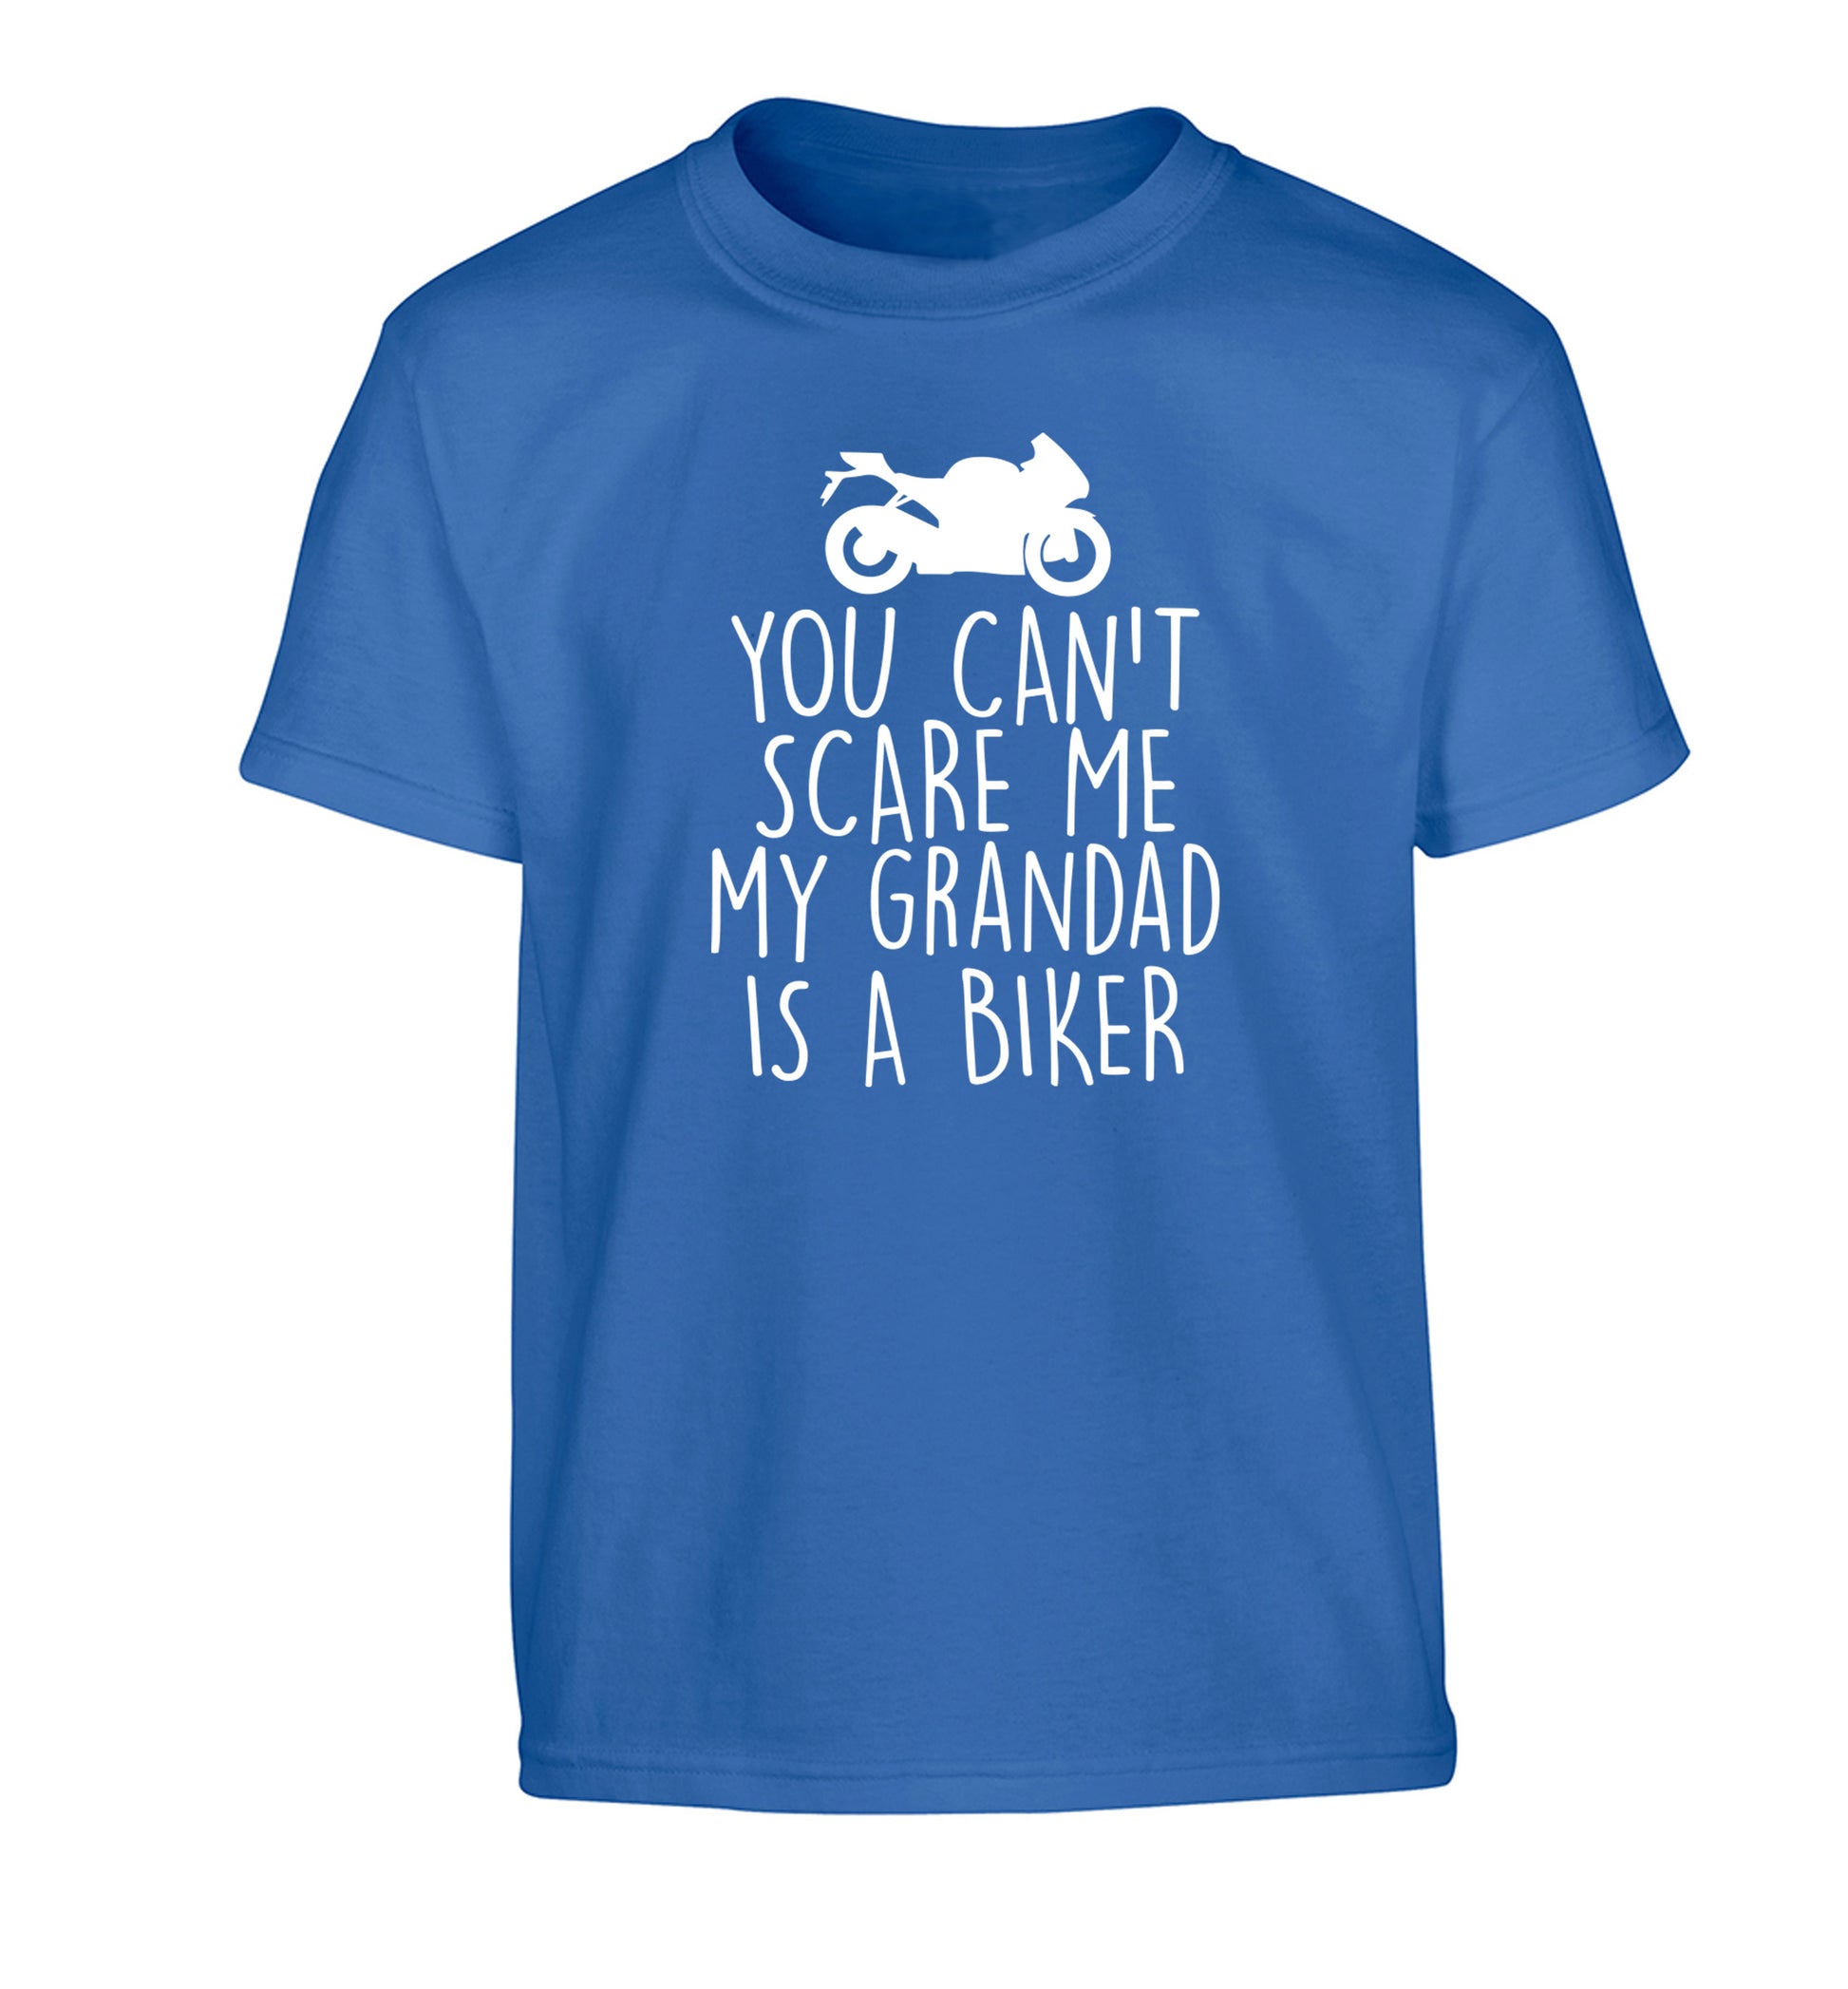 You can't scare me my grandad is a biker Children's blue Tshirt 12-13 Years